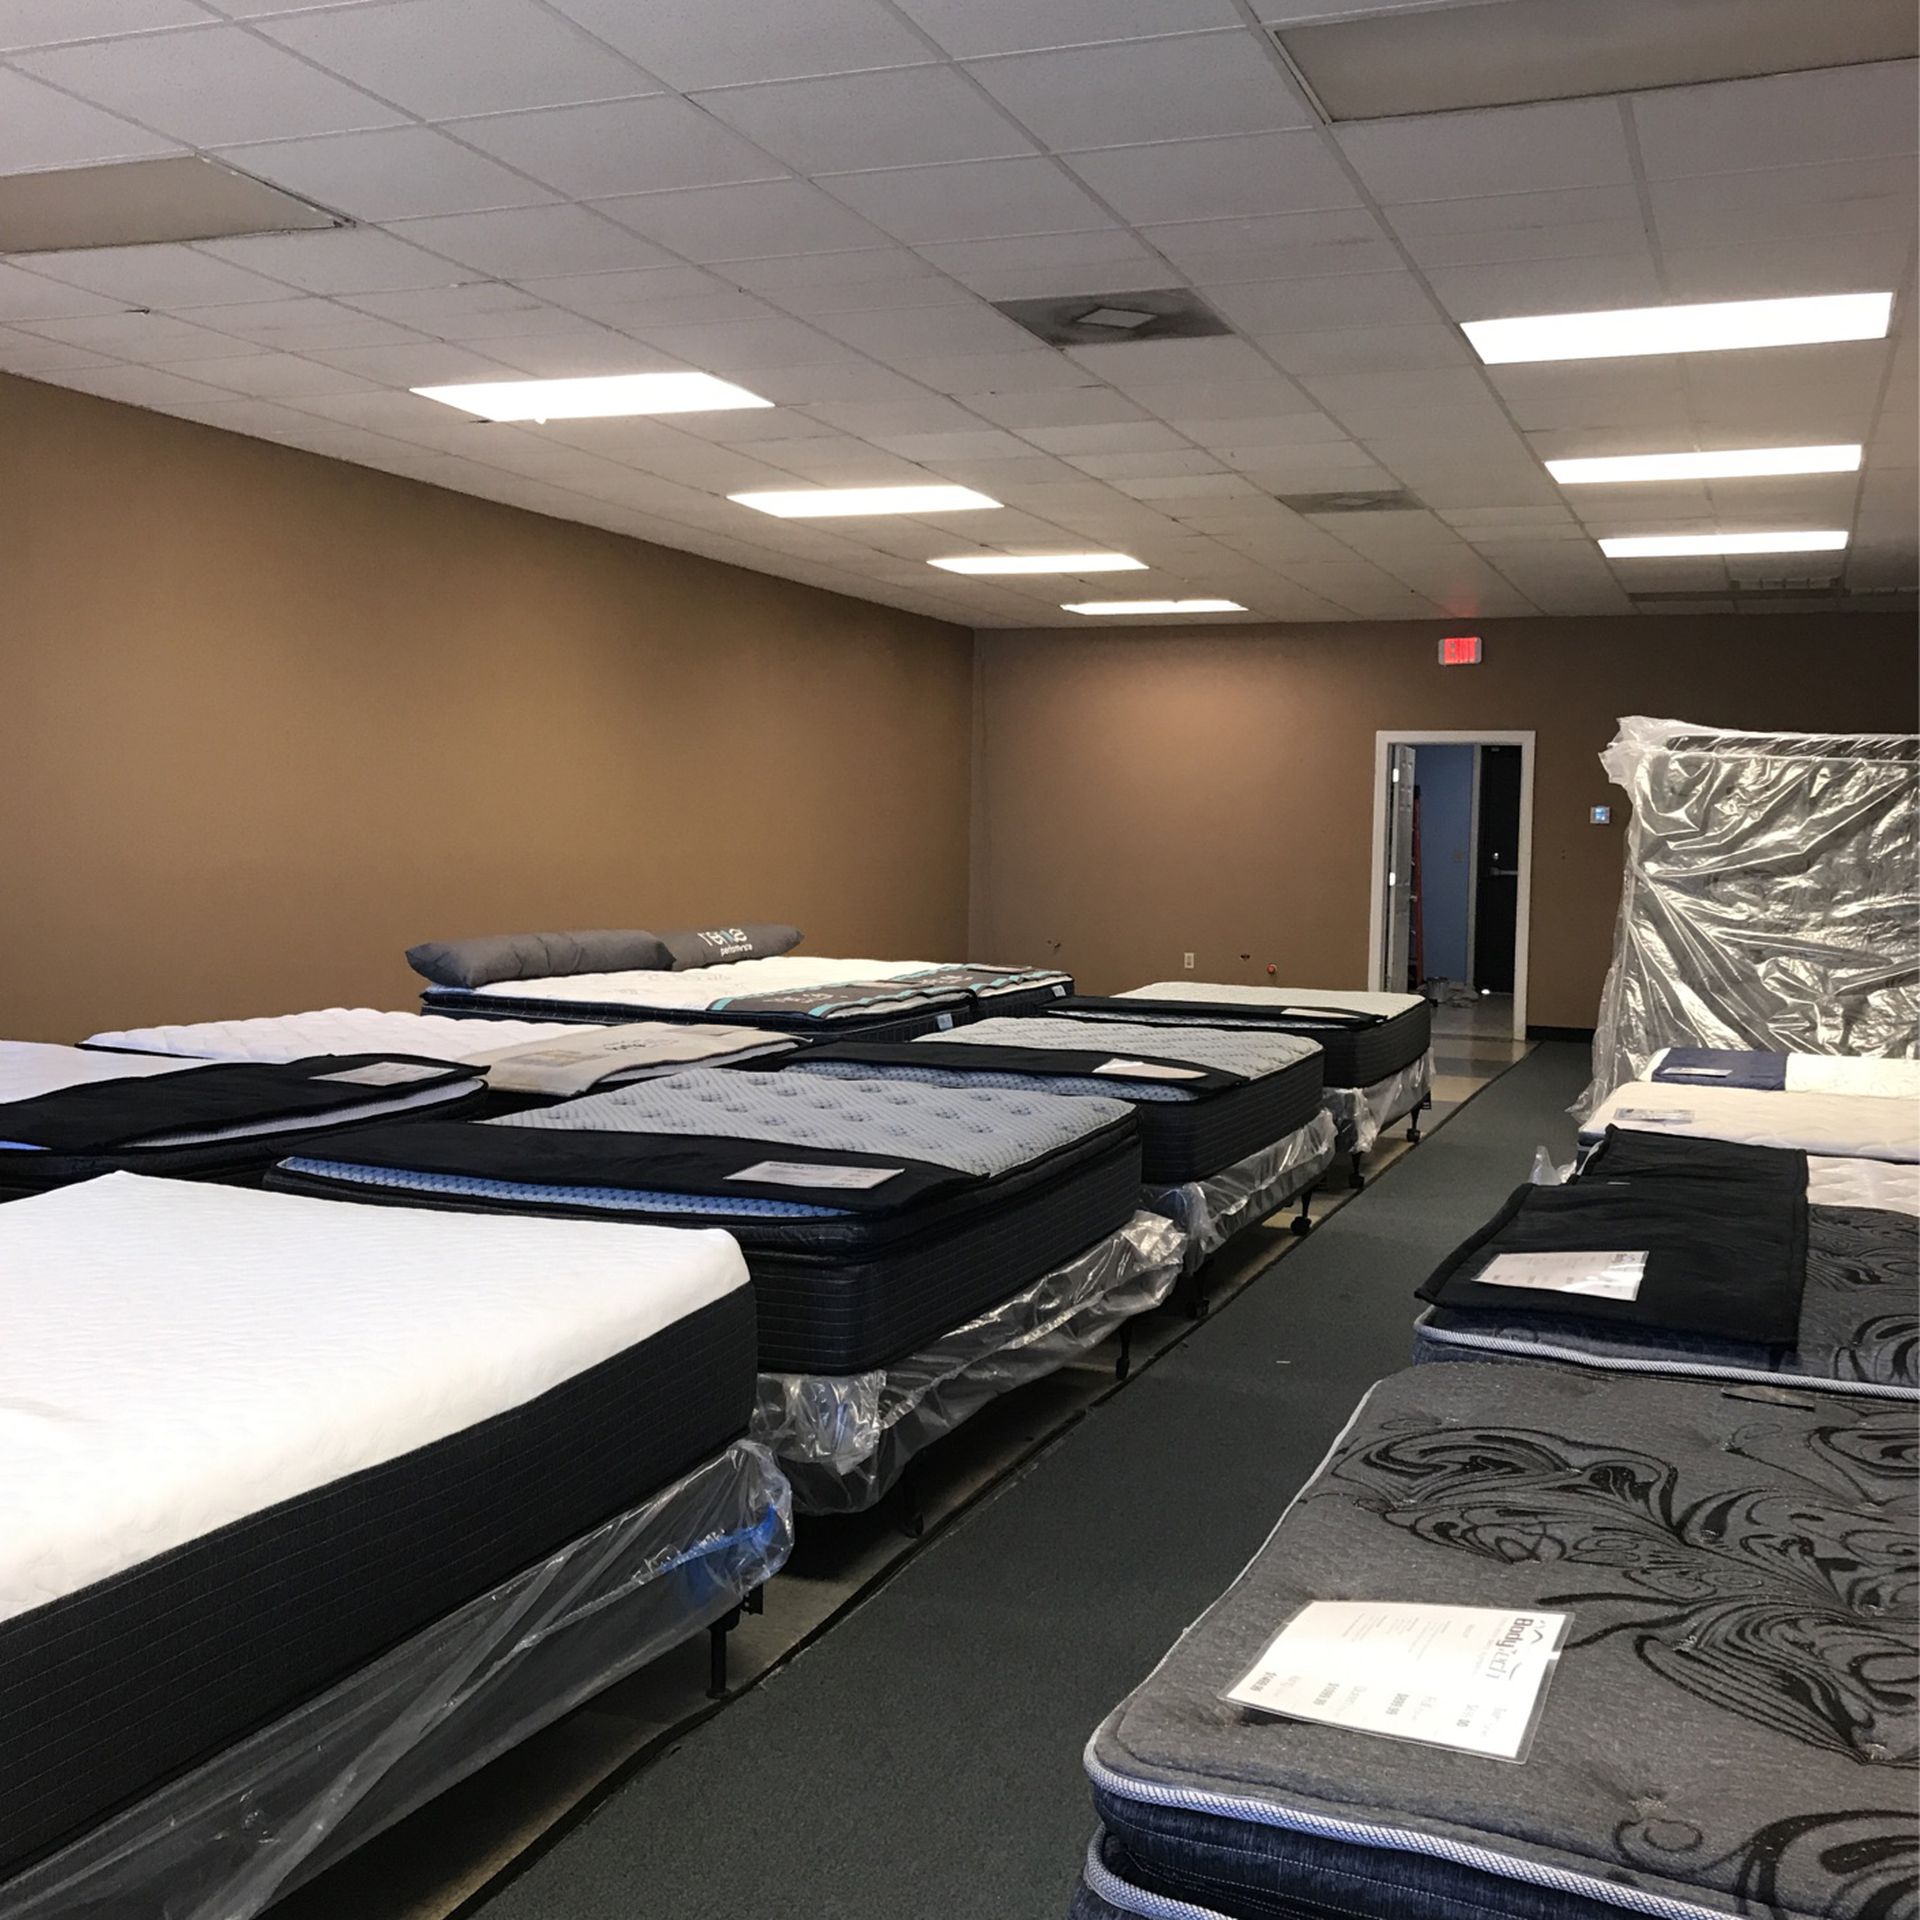 Brand New Twin Mattress Sets As Low As $99